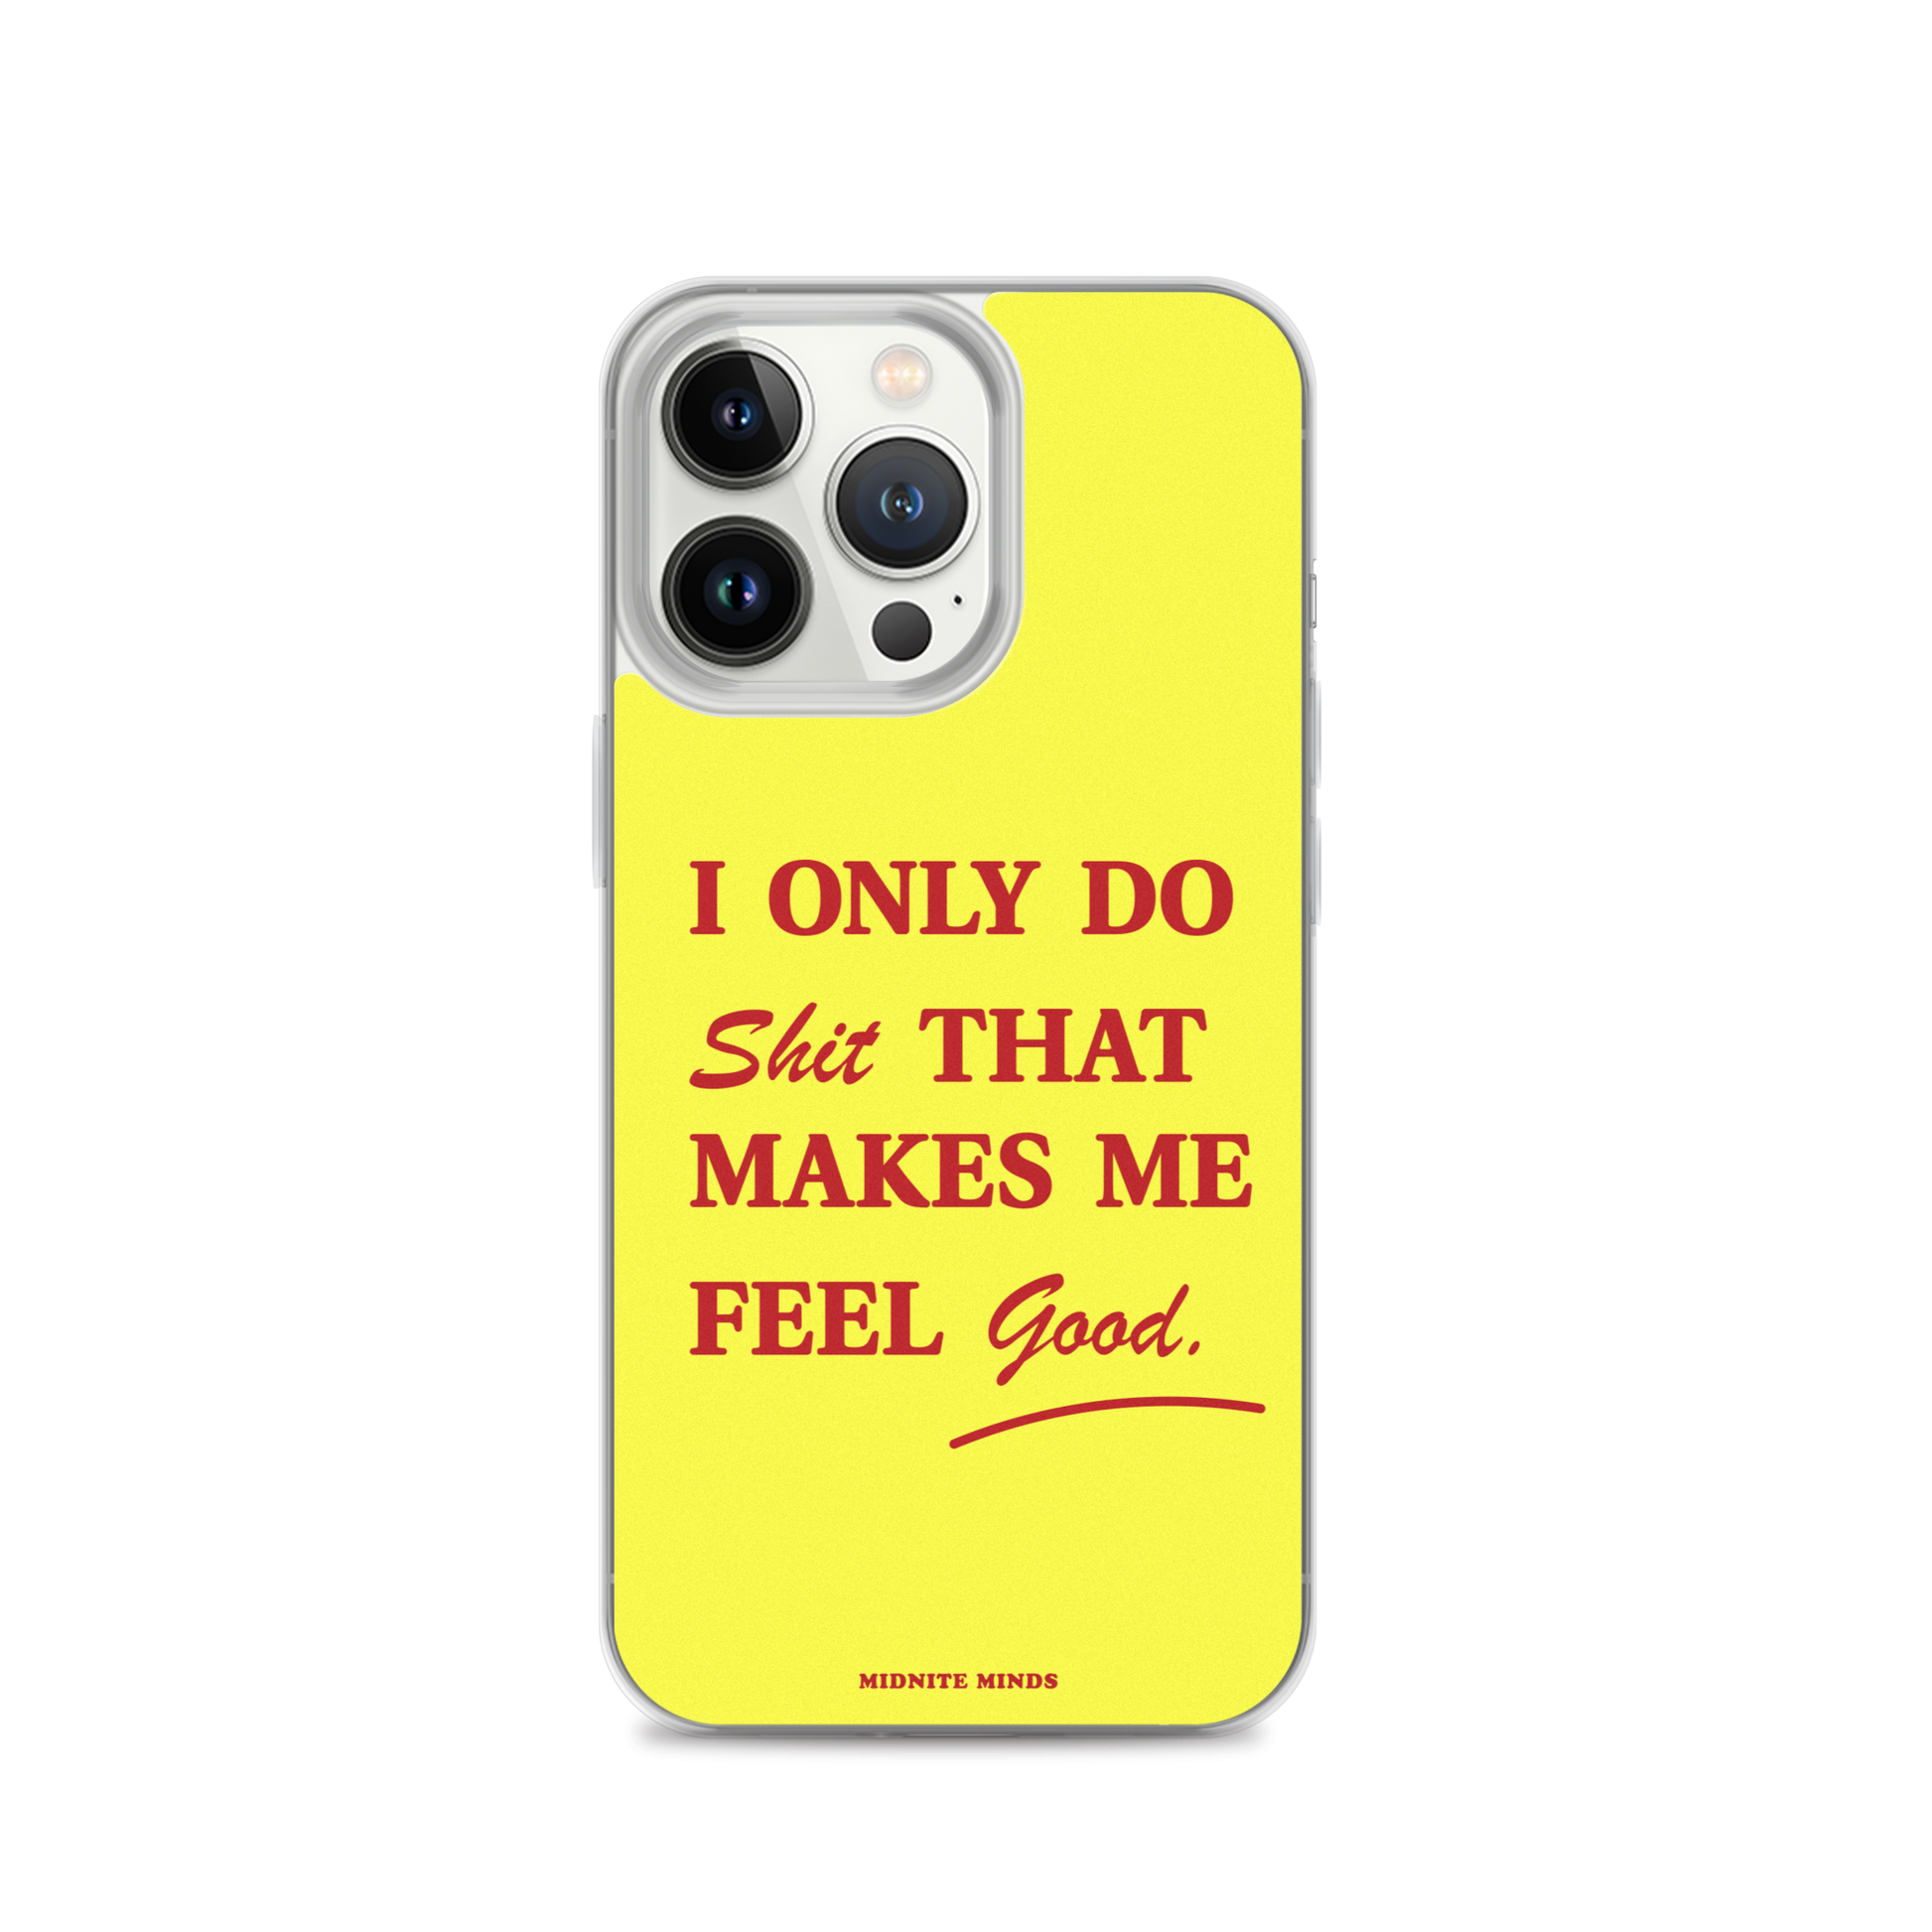 feel good iphone case, yellow iphone case, cute iphone case, phone case for women